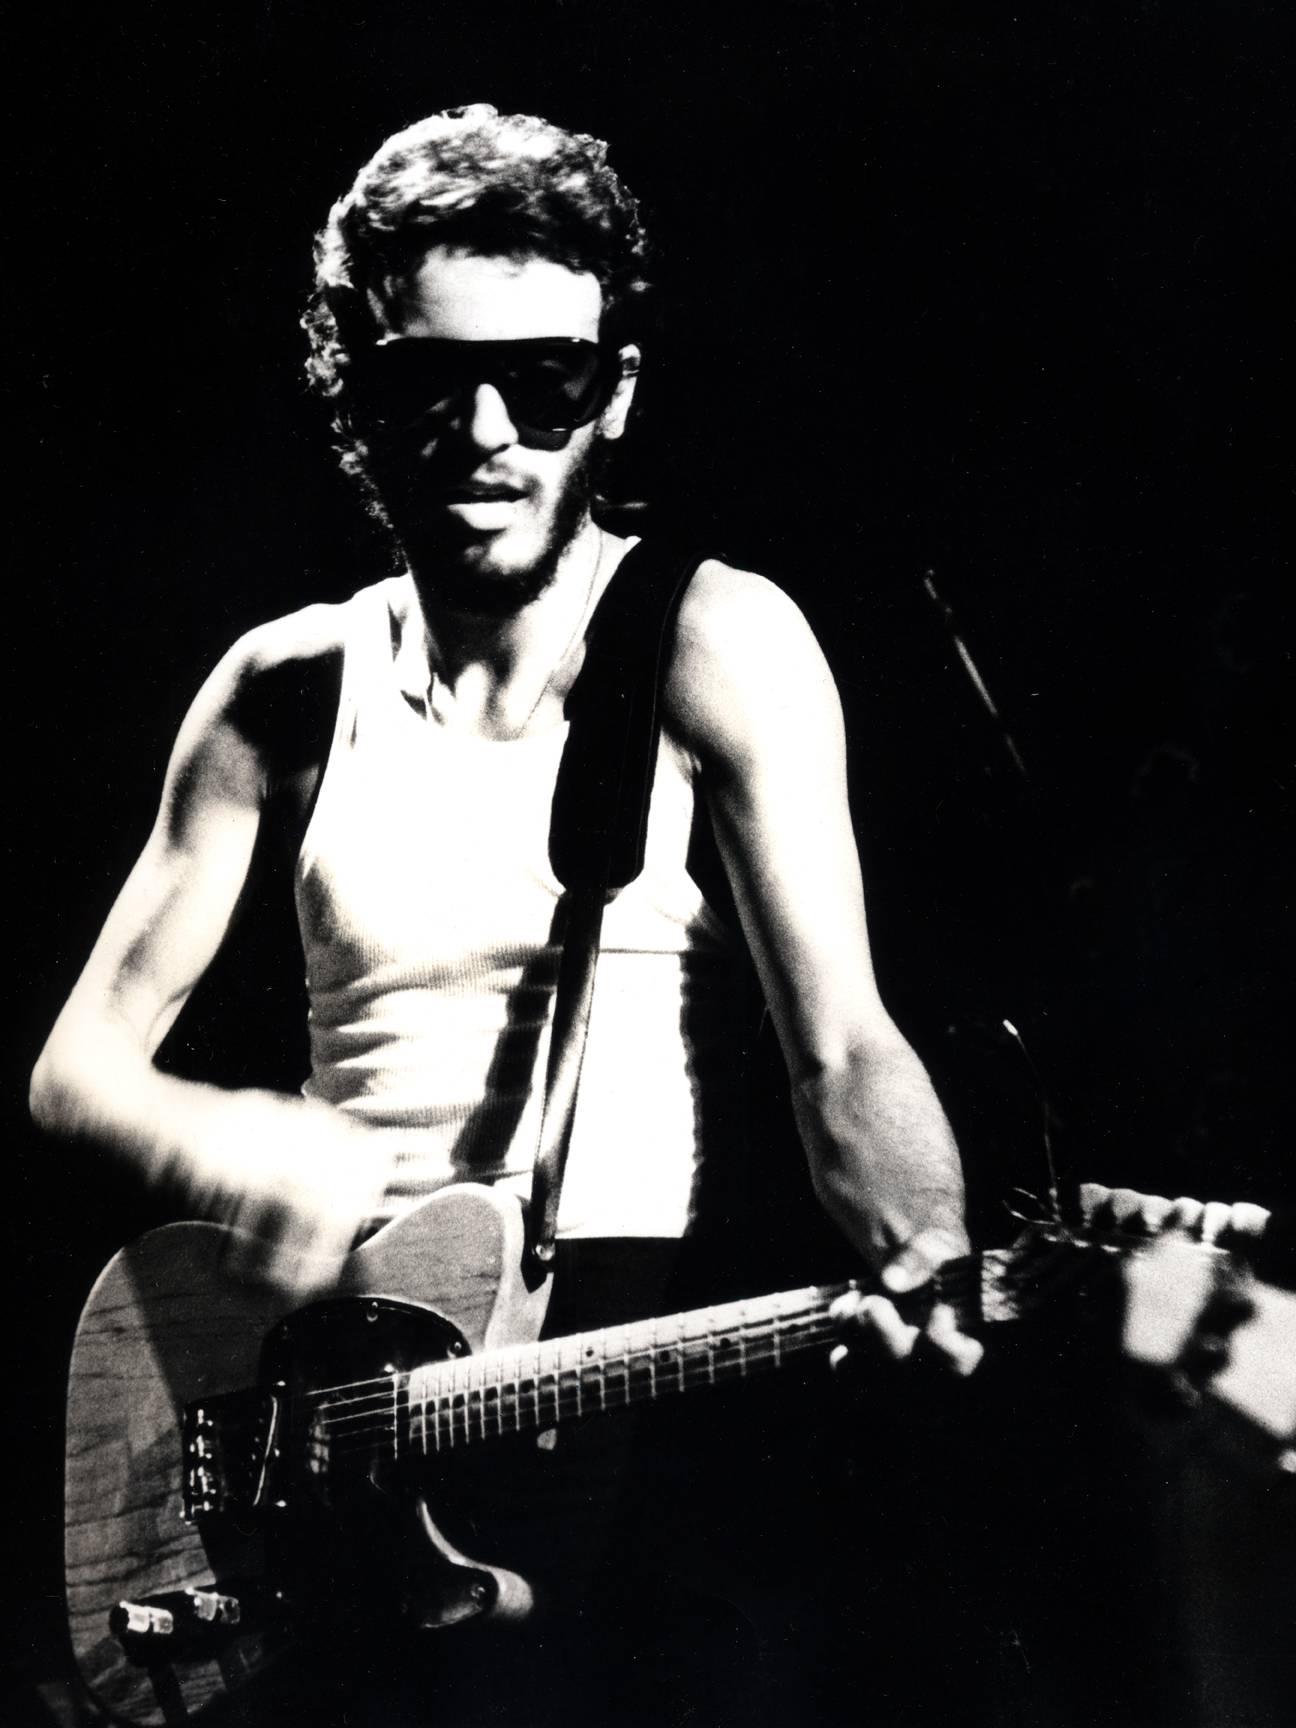 Bruce Springsteen photograph (Bruce Springsteen the Bottom Line, NYC 1975) - Photograph by Fernando Natalici